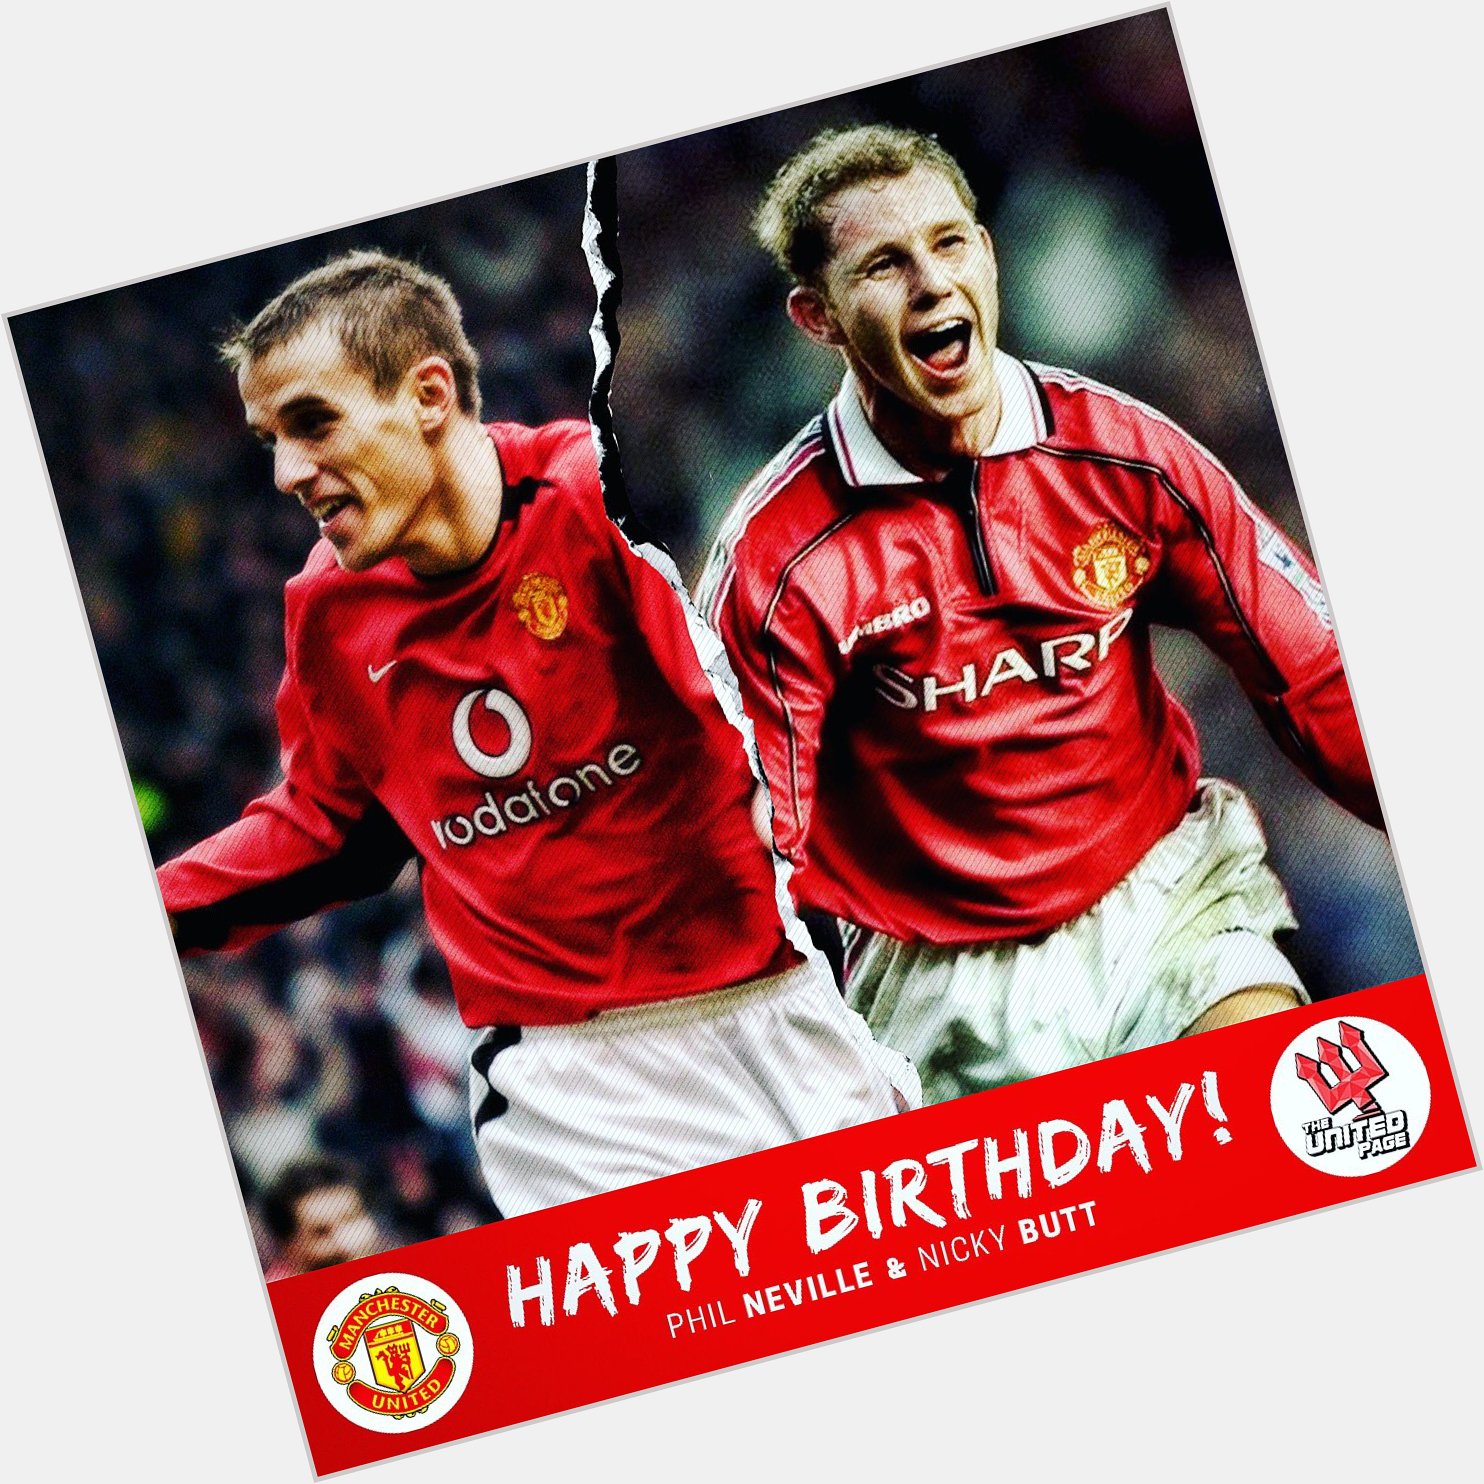 Happy birthday Phil Neville and Nicky Butt!  